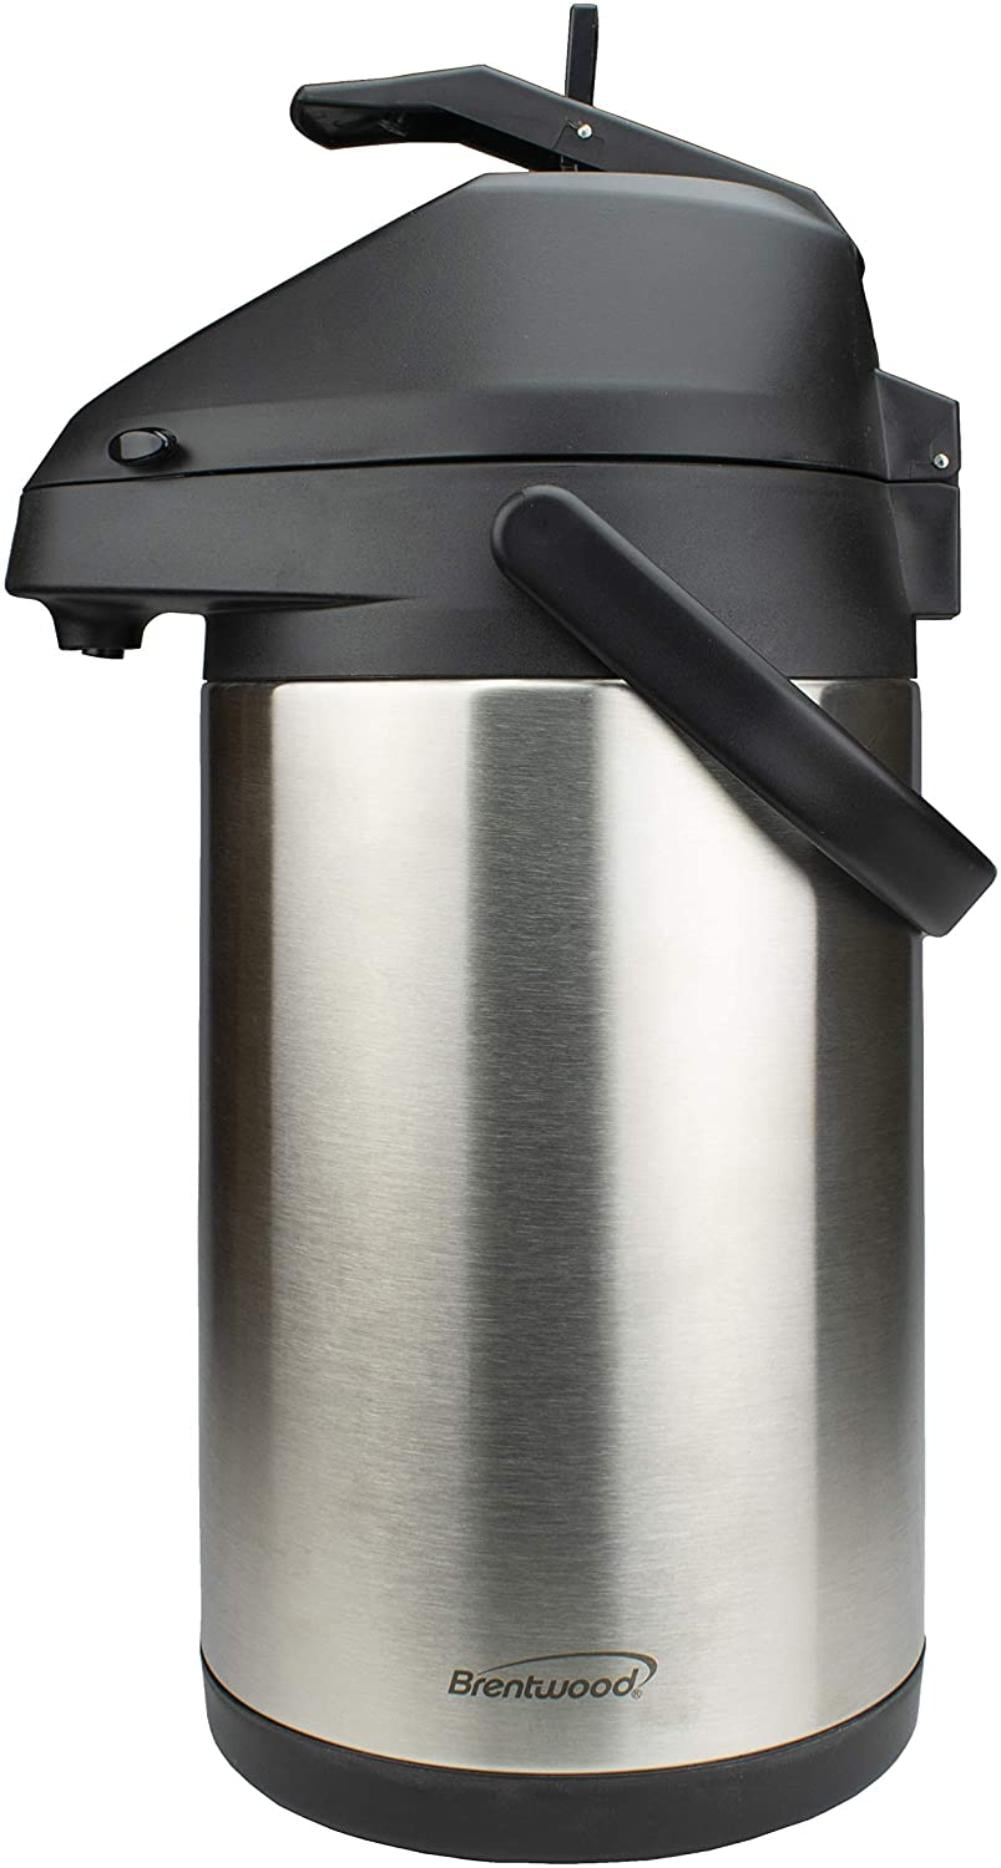 S/S AIR POT VACCUM THERMOS FLASK OUTDOOR OFFICE HOT/COLD DRINK 3-5 LTRS 